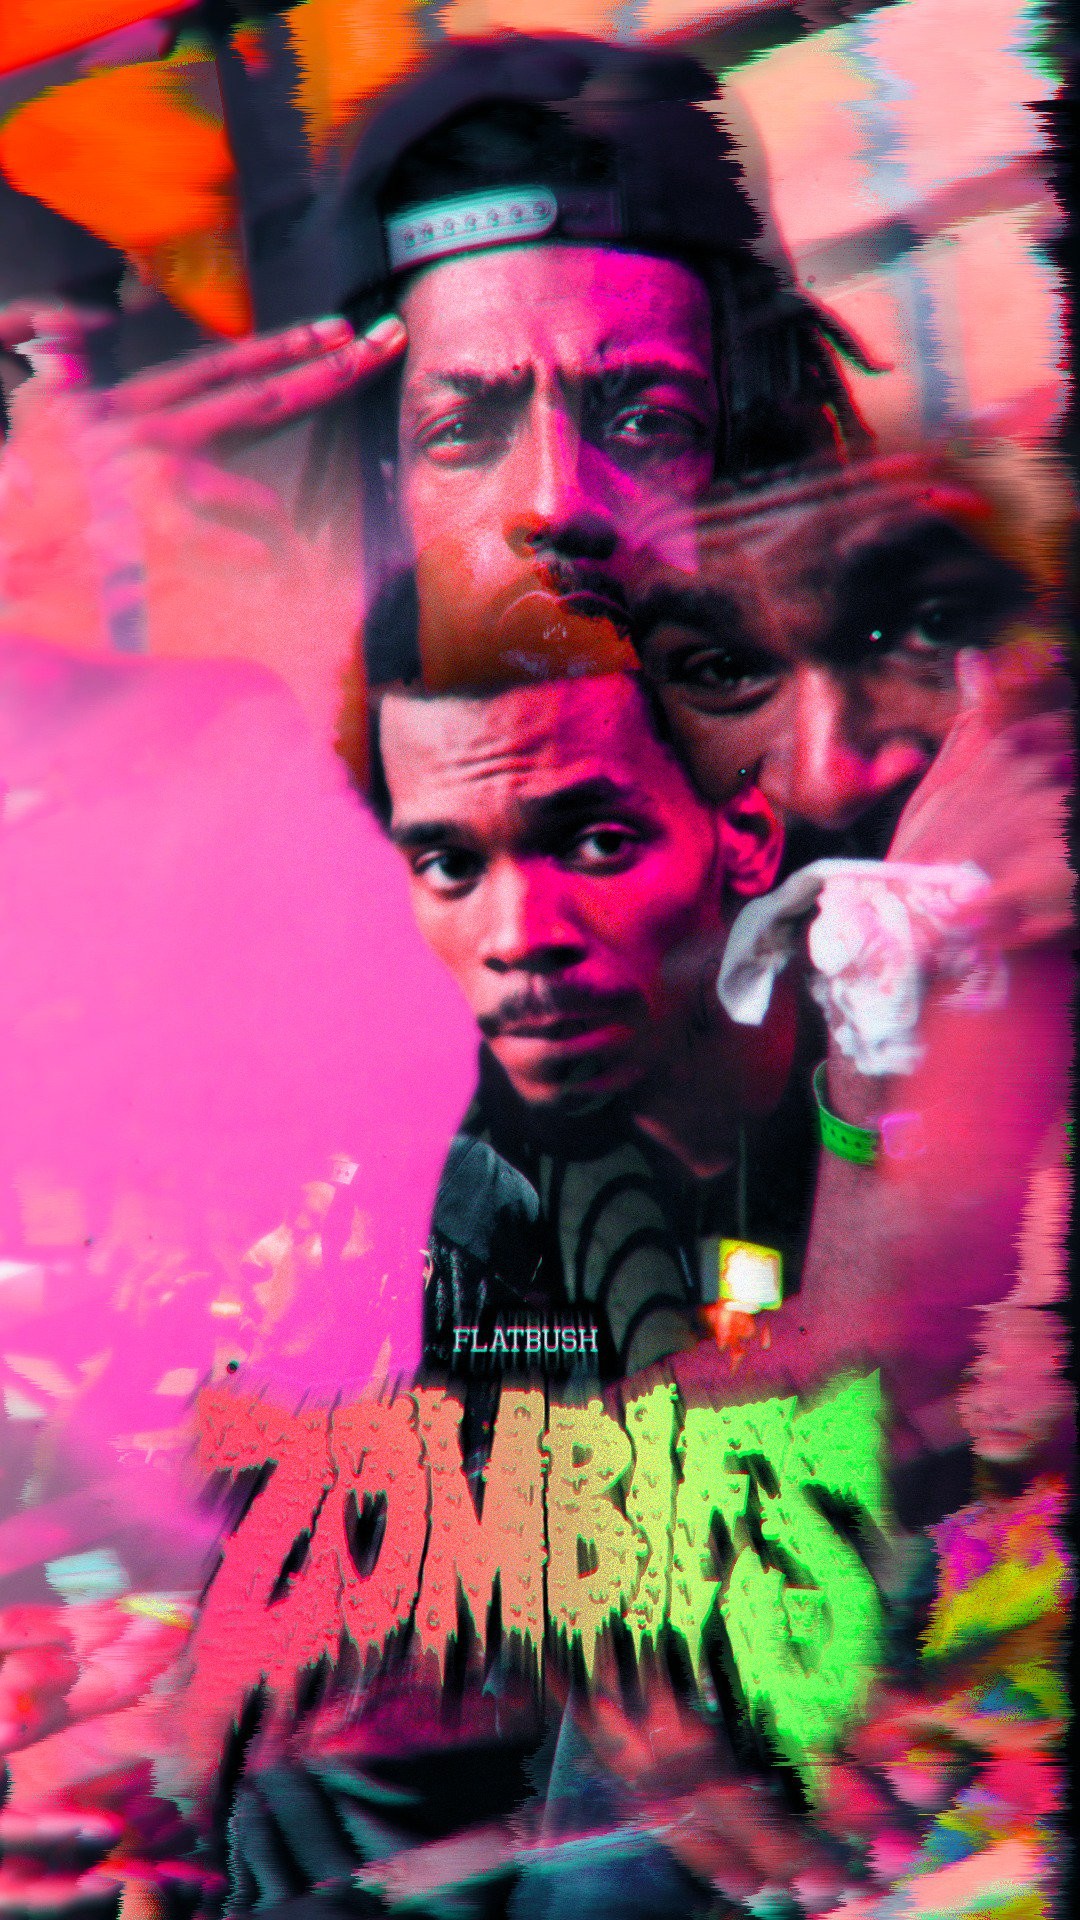 Zombies Horror Face Hd Wallpapers 10 High Quality Zombies - Flatbush Zombies Wallpaper Iphone X , HD Wallpaper & Backgrounds